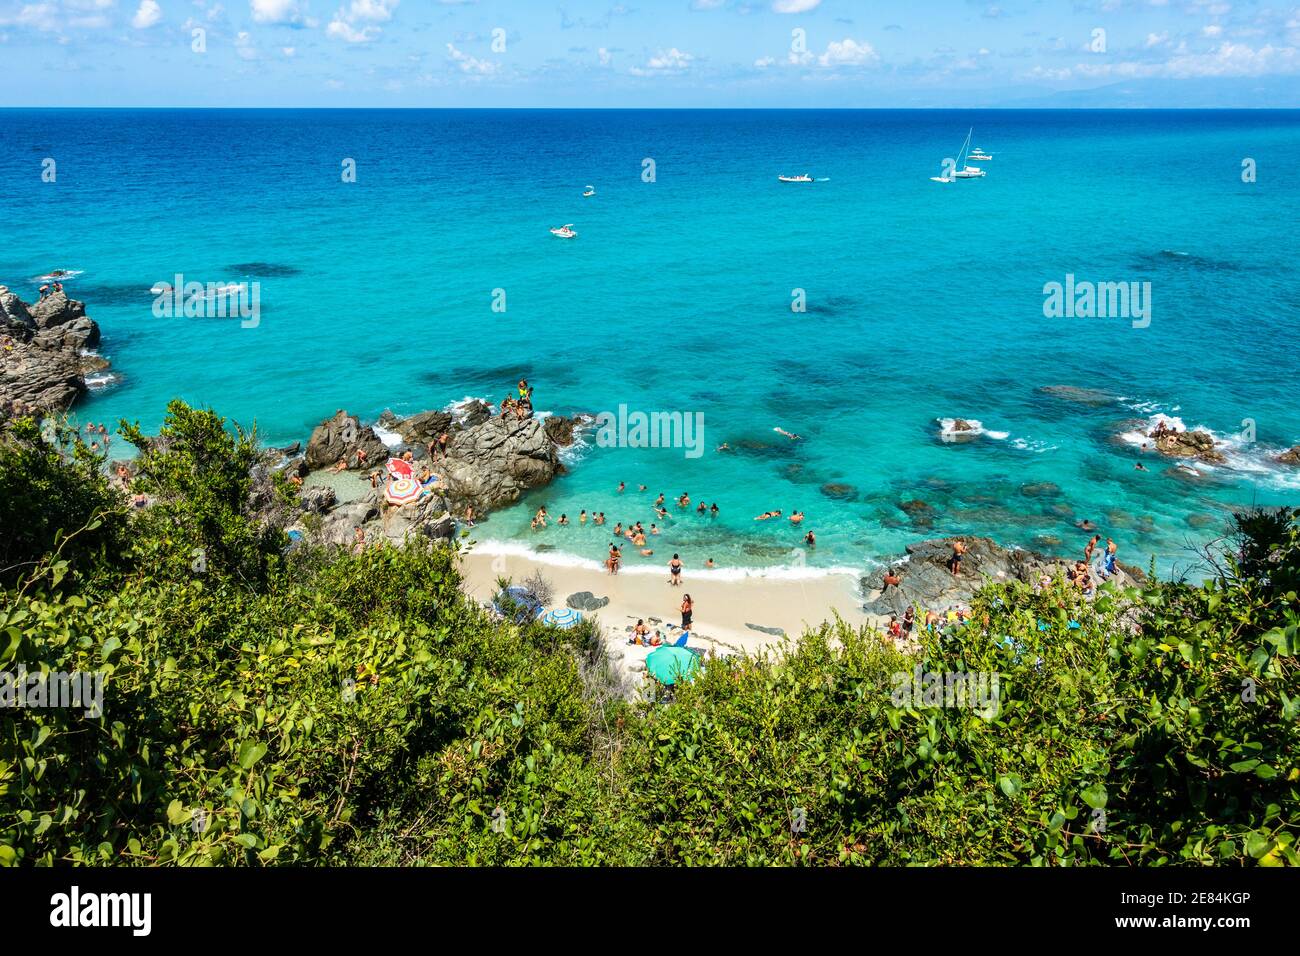 Aerial view of Zambrone “Paradiso del Sub” beach, one of the most beautiful beach of Calabria region, Italy Stock Photo